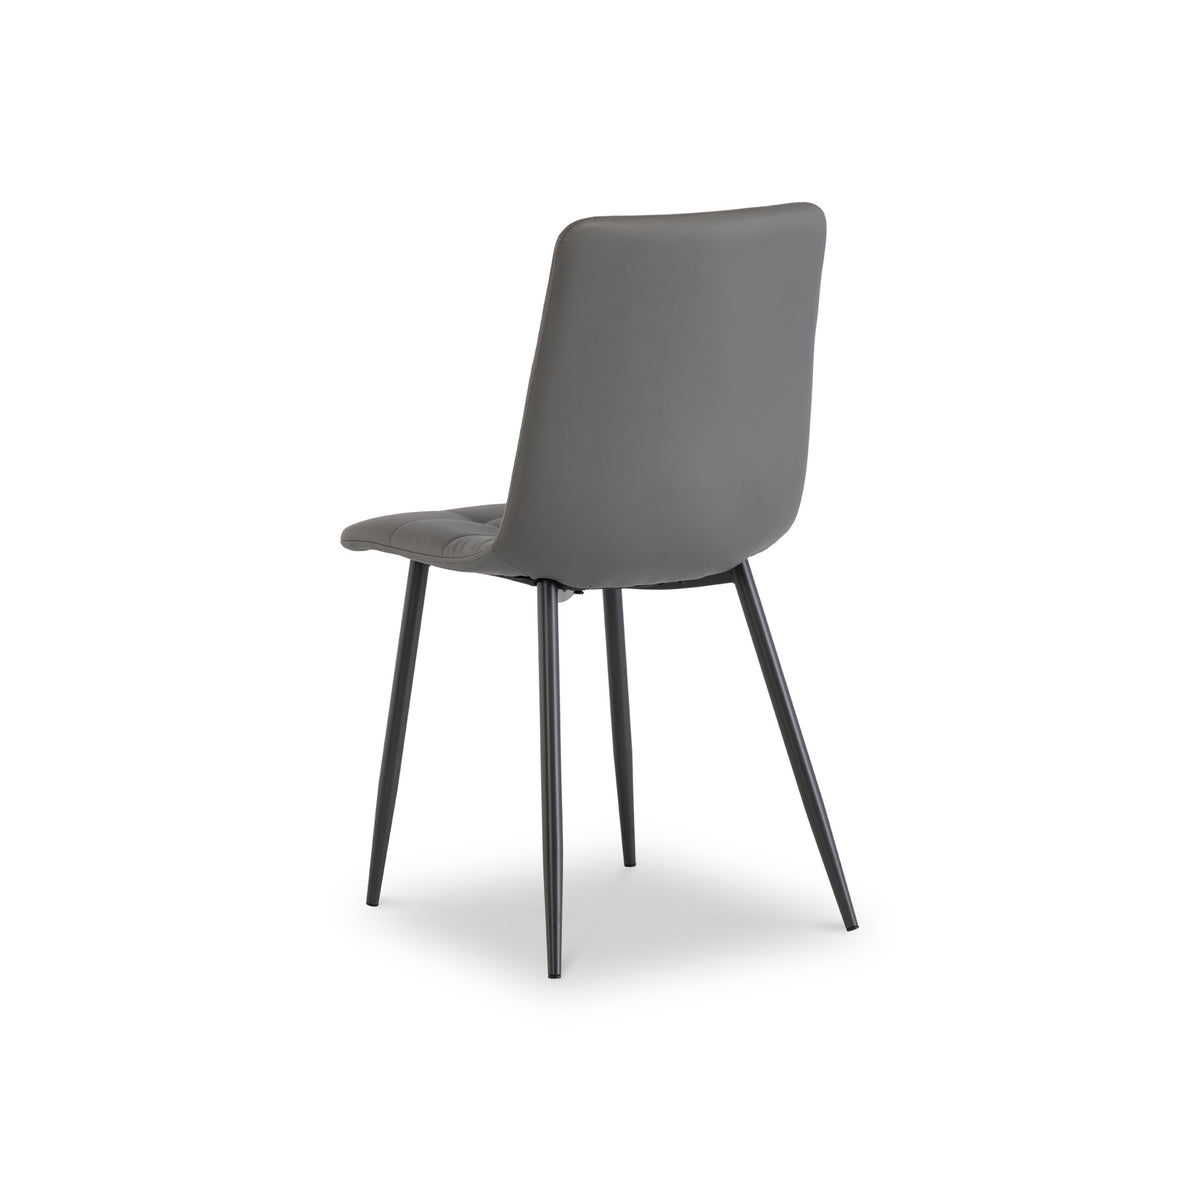  Alis Grey Faux Leather Dining Chair